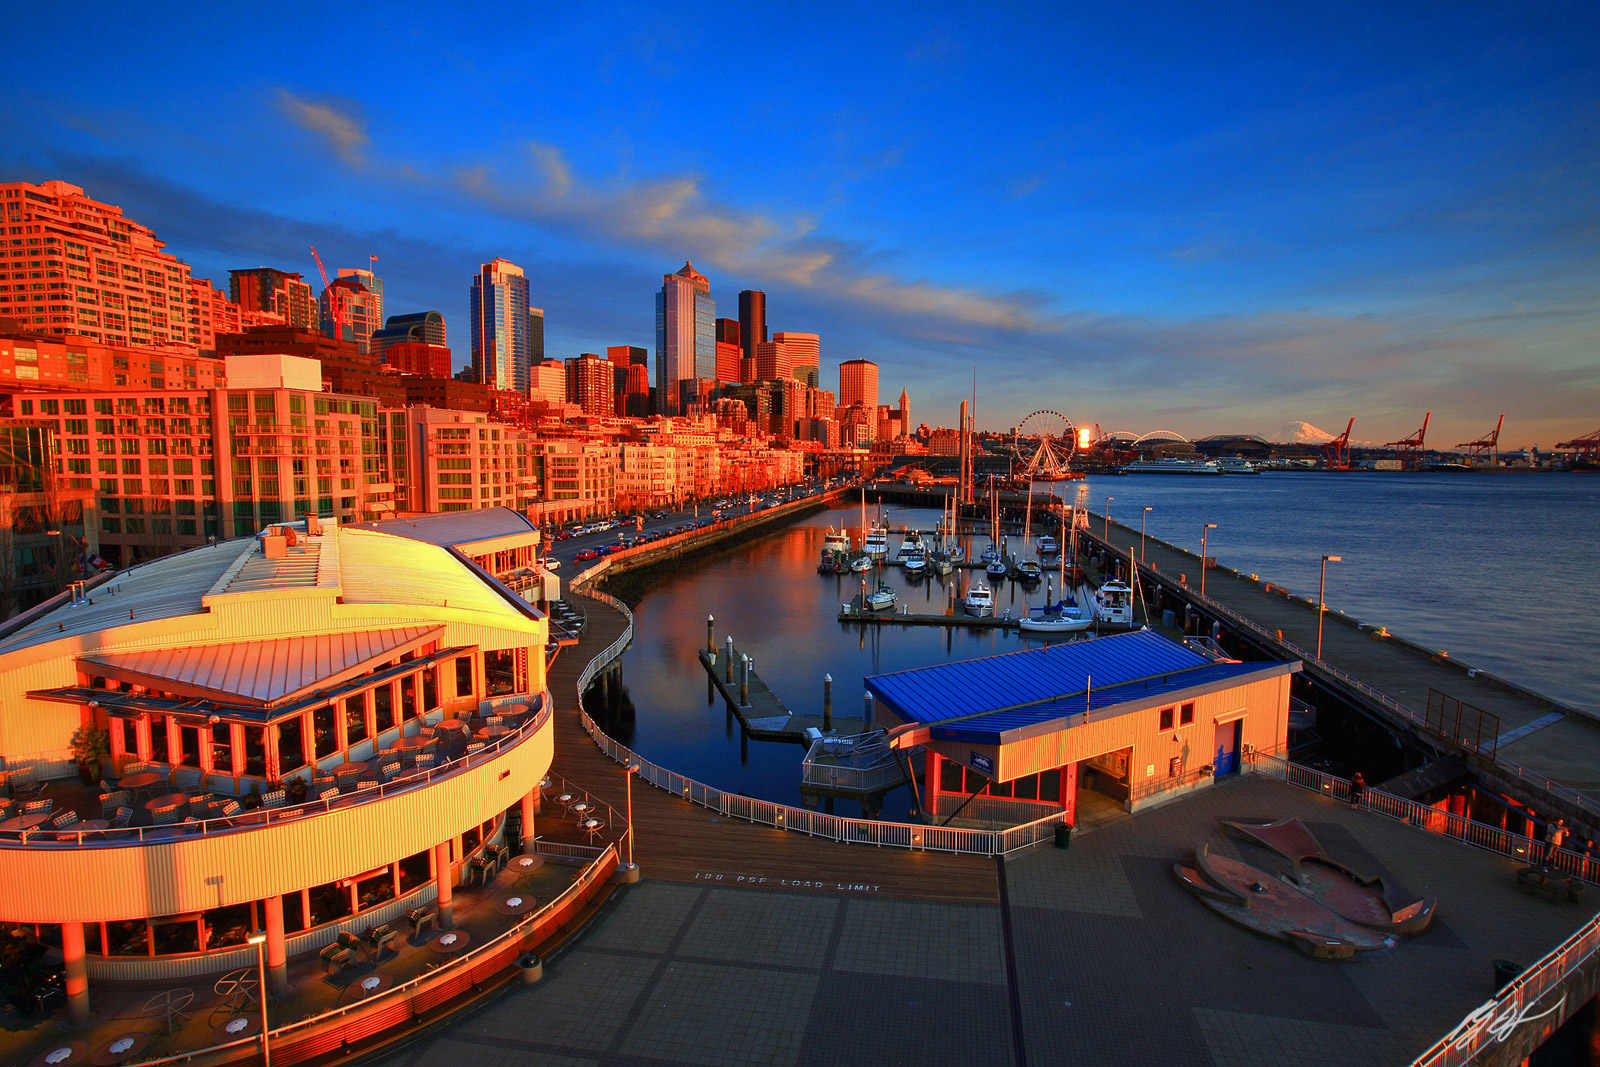 Evening Light on the Seattle Waterfront from Pier 66 in Seattle, Washington